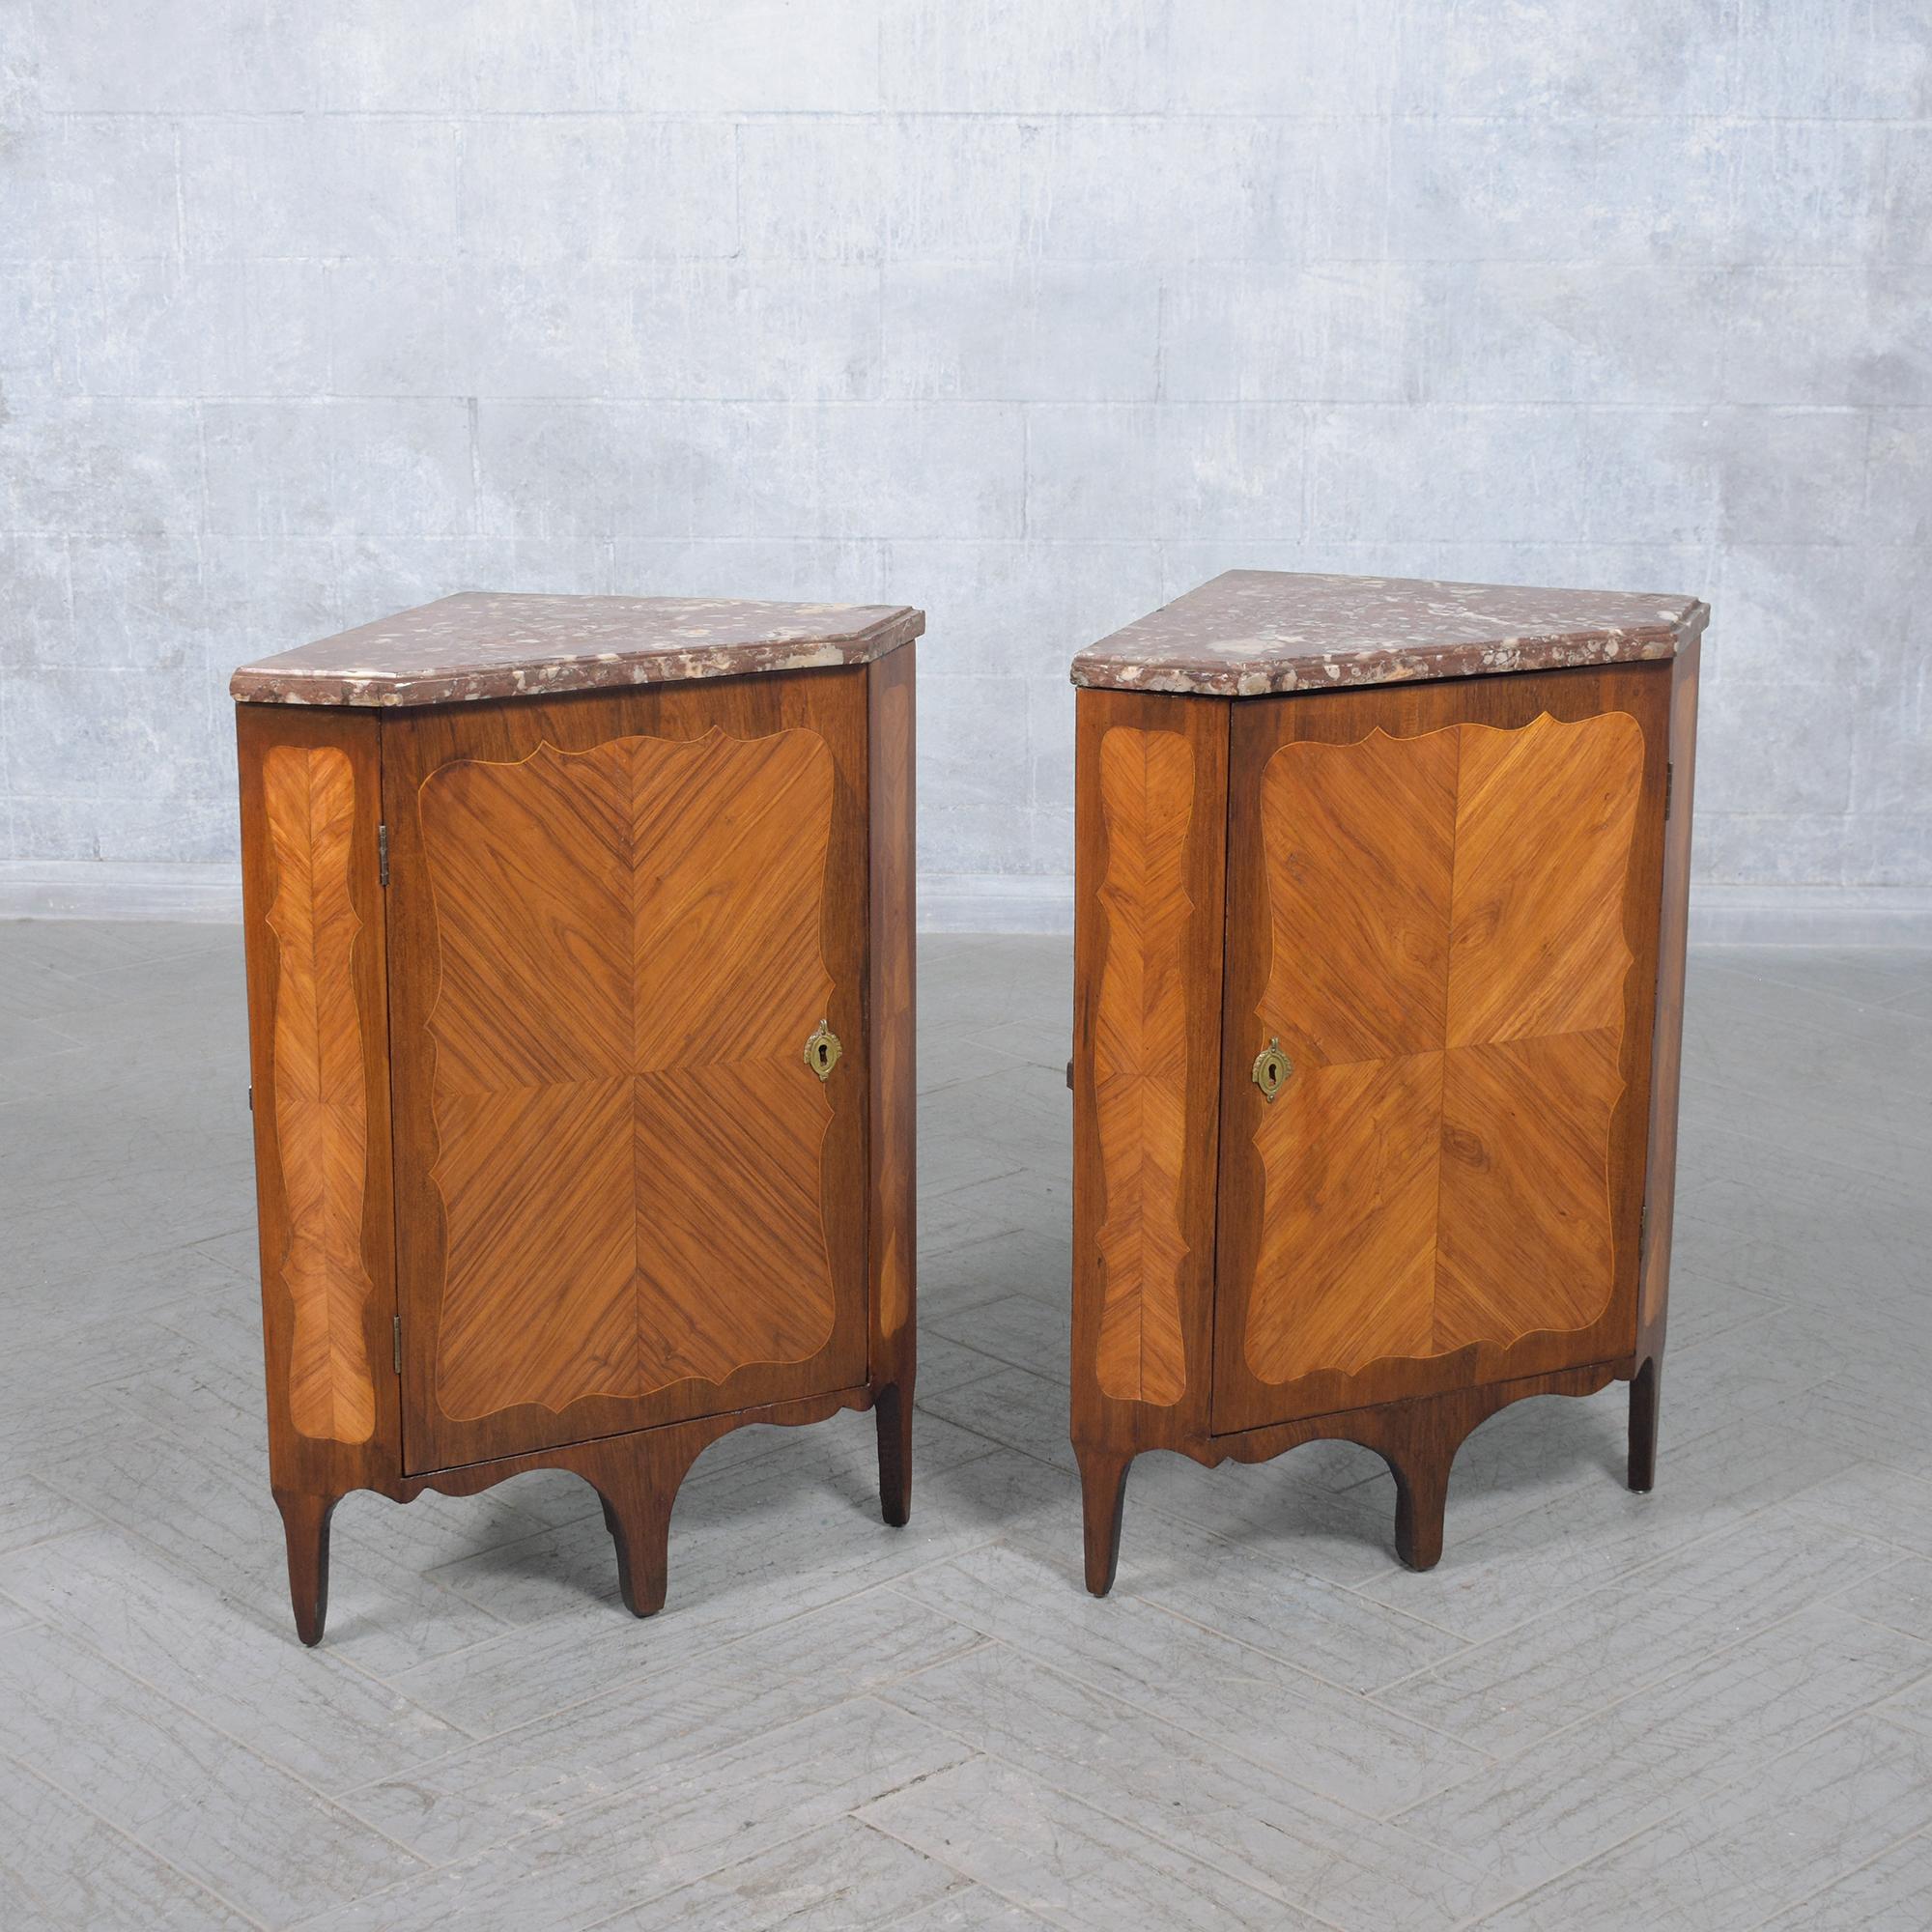 Late 18th-Century French Corner Cabinets with Marble Tops: Restored Elegance For Sale 4